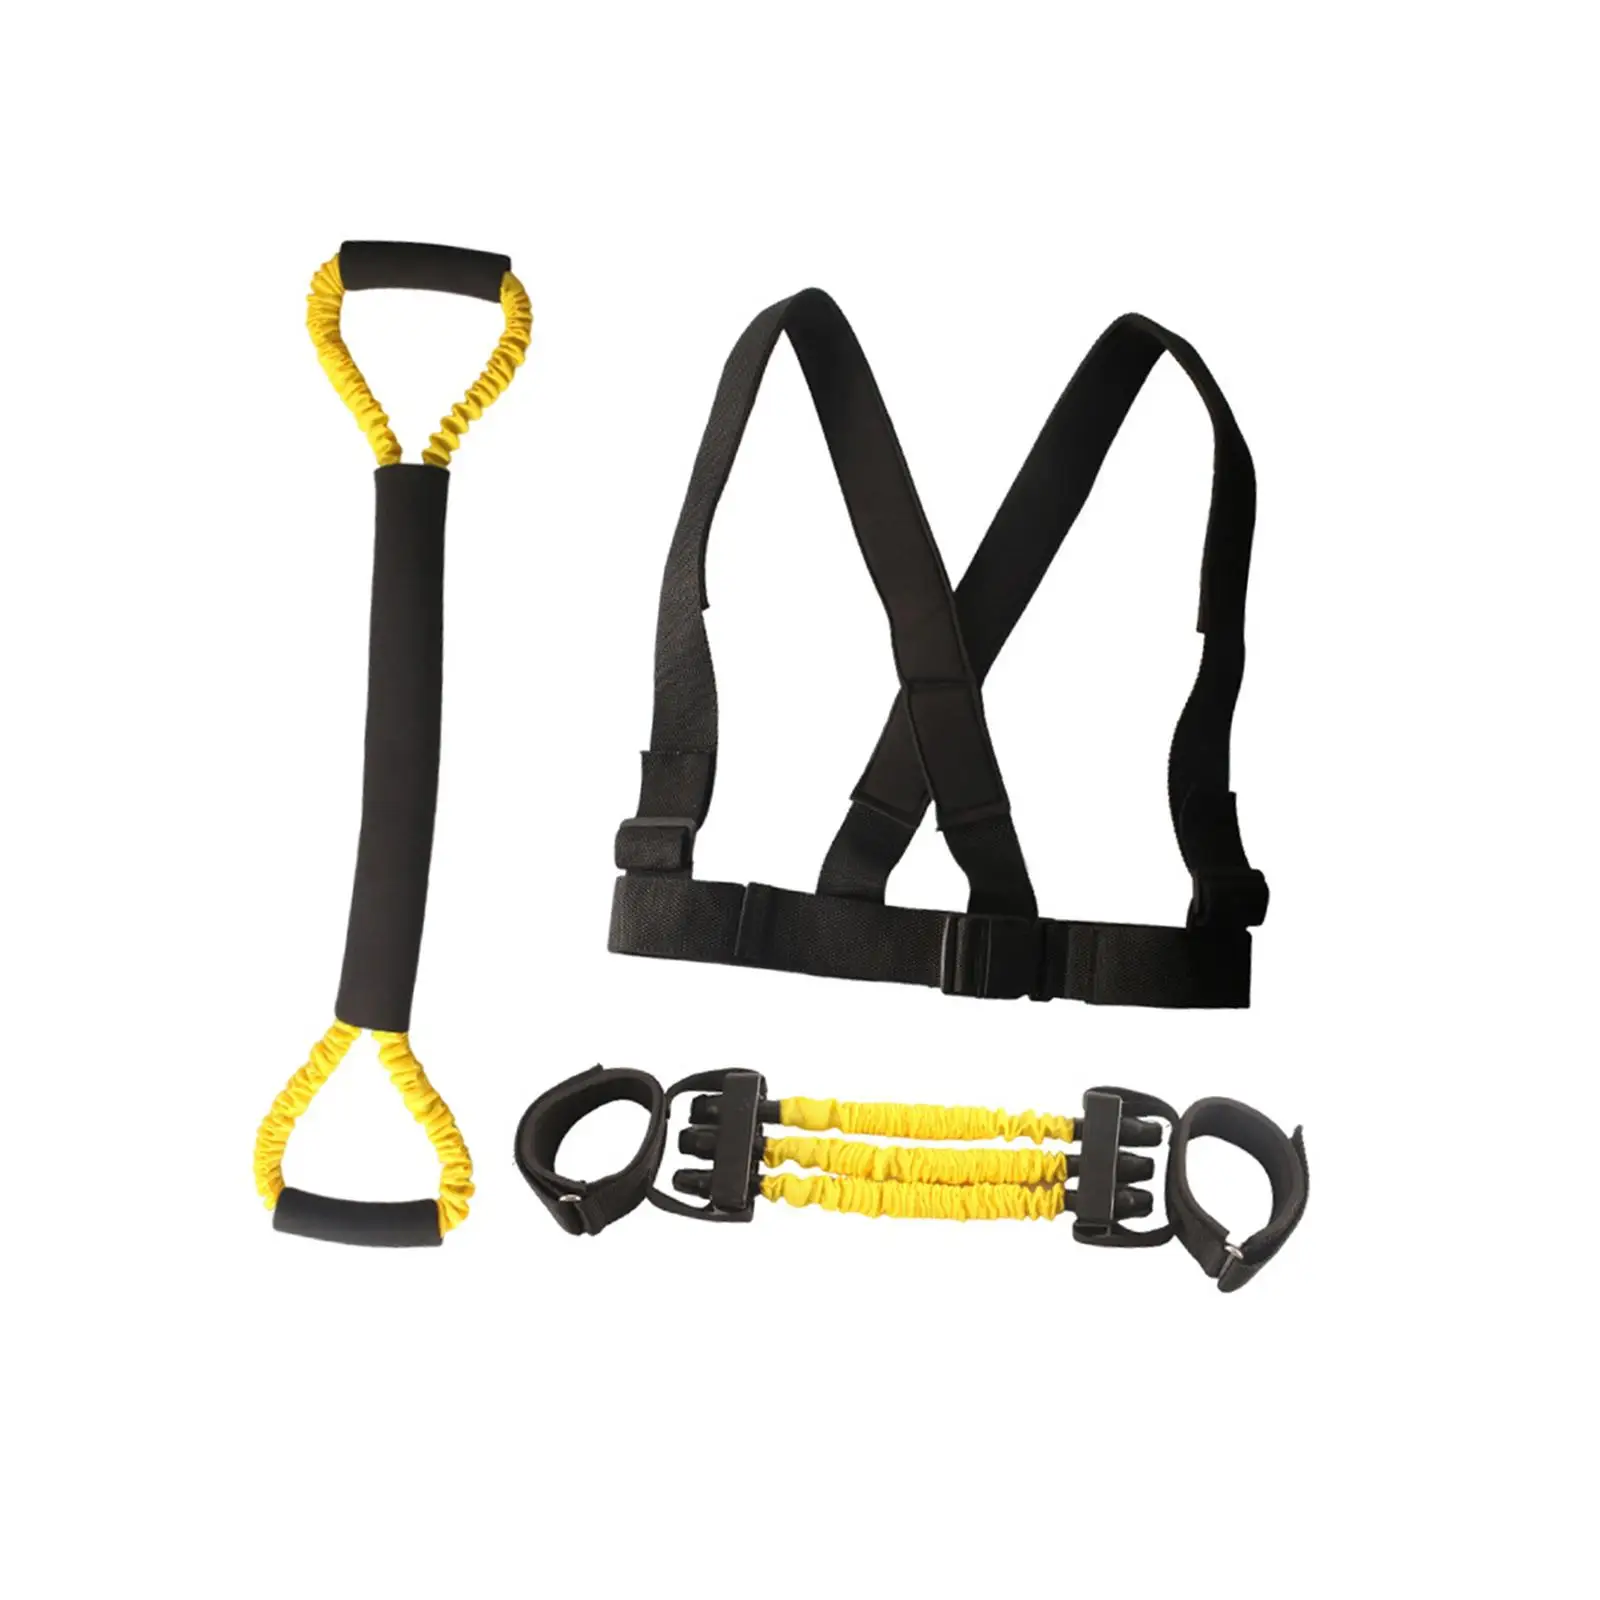 Exercise Band Yoga with Ankle Cuffs Volleyball Boxing Resistance Bands Set